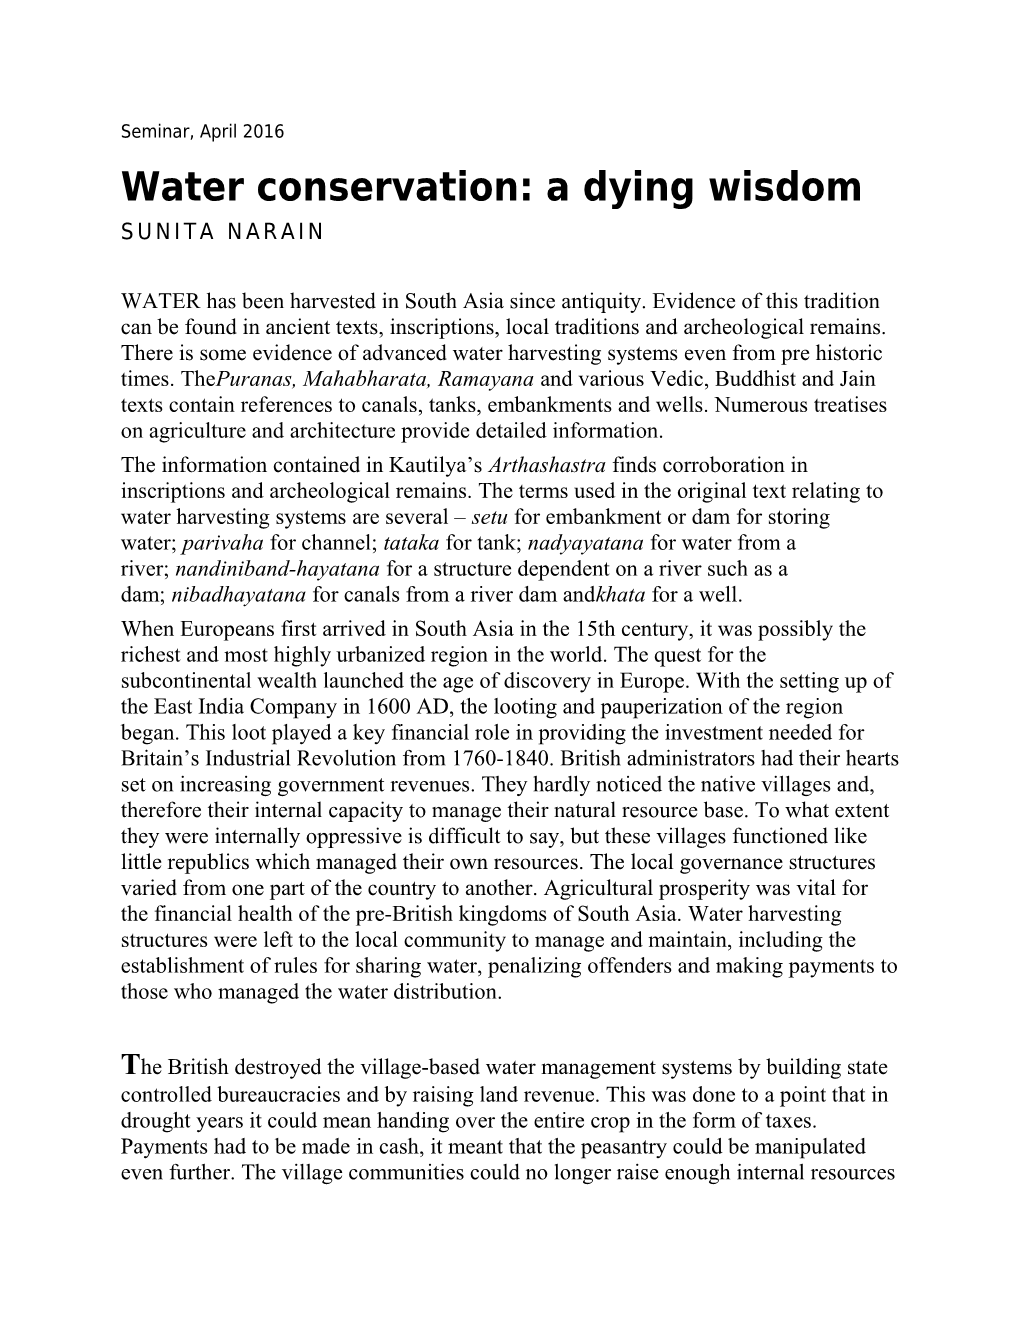 Water Conservation: a Dying Wisdom